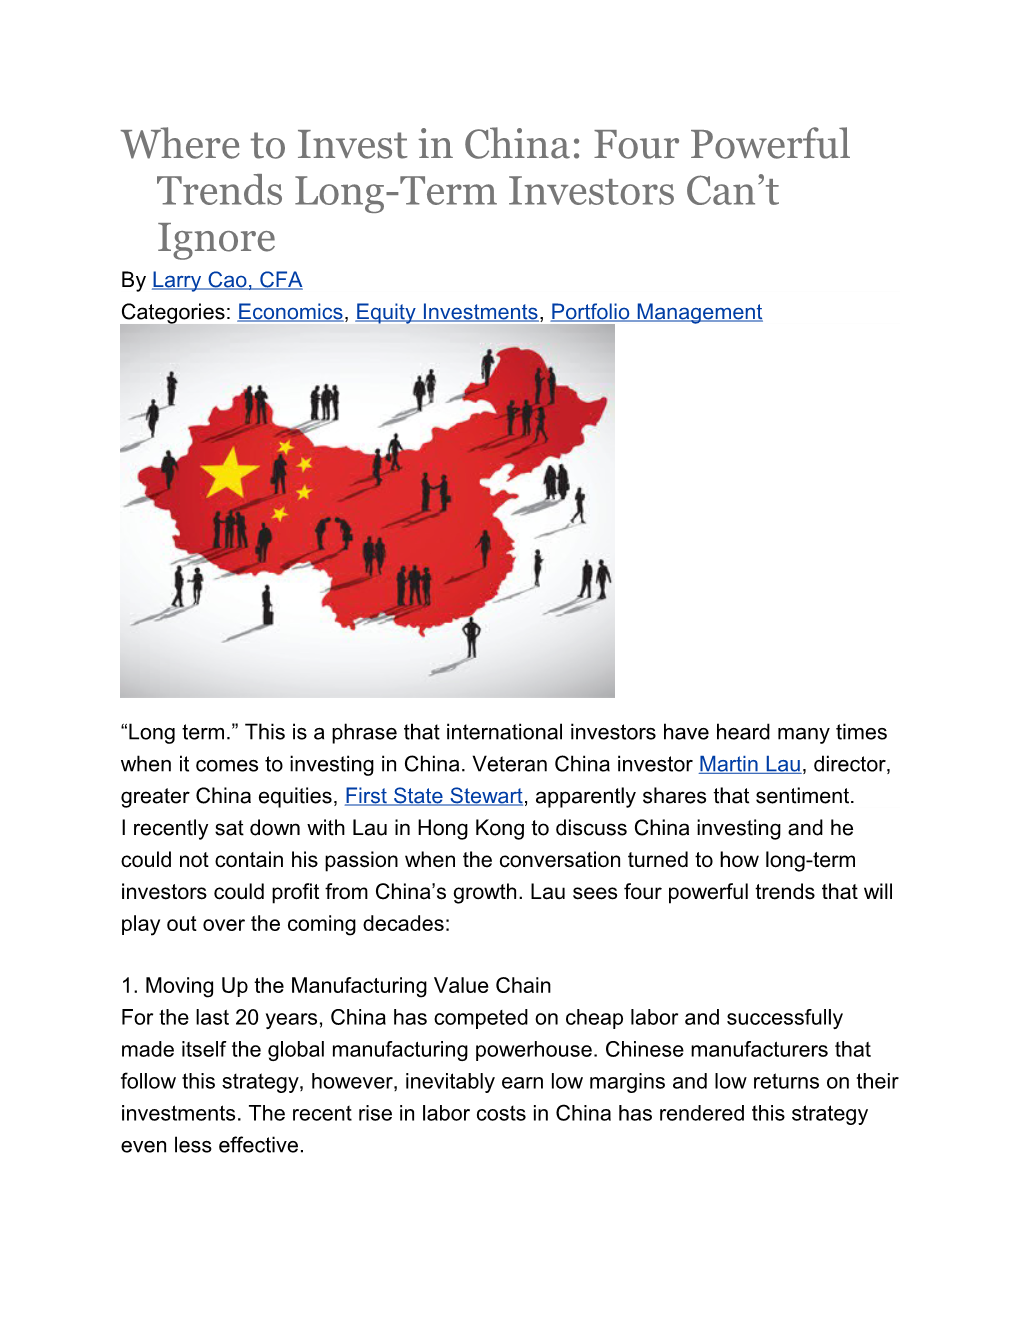 Where to Invest in China: Four Powerful Trends Long-Term Investors Can T Ignore